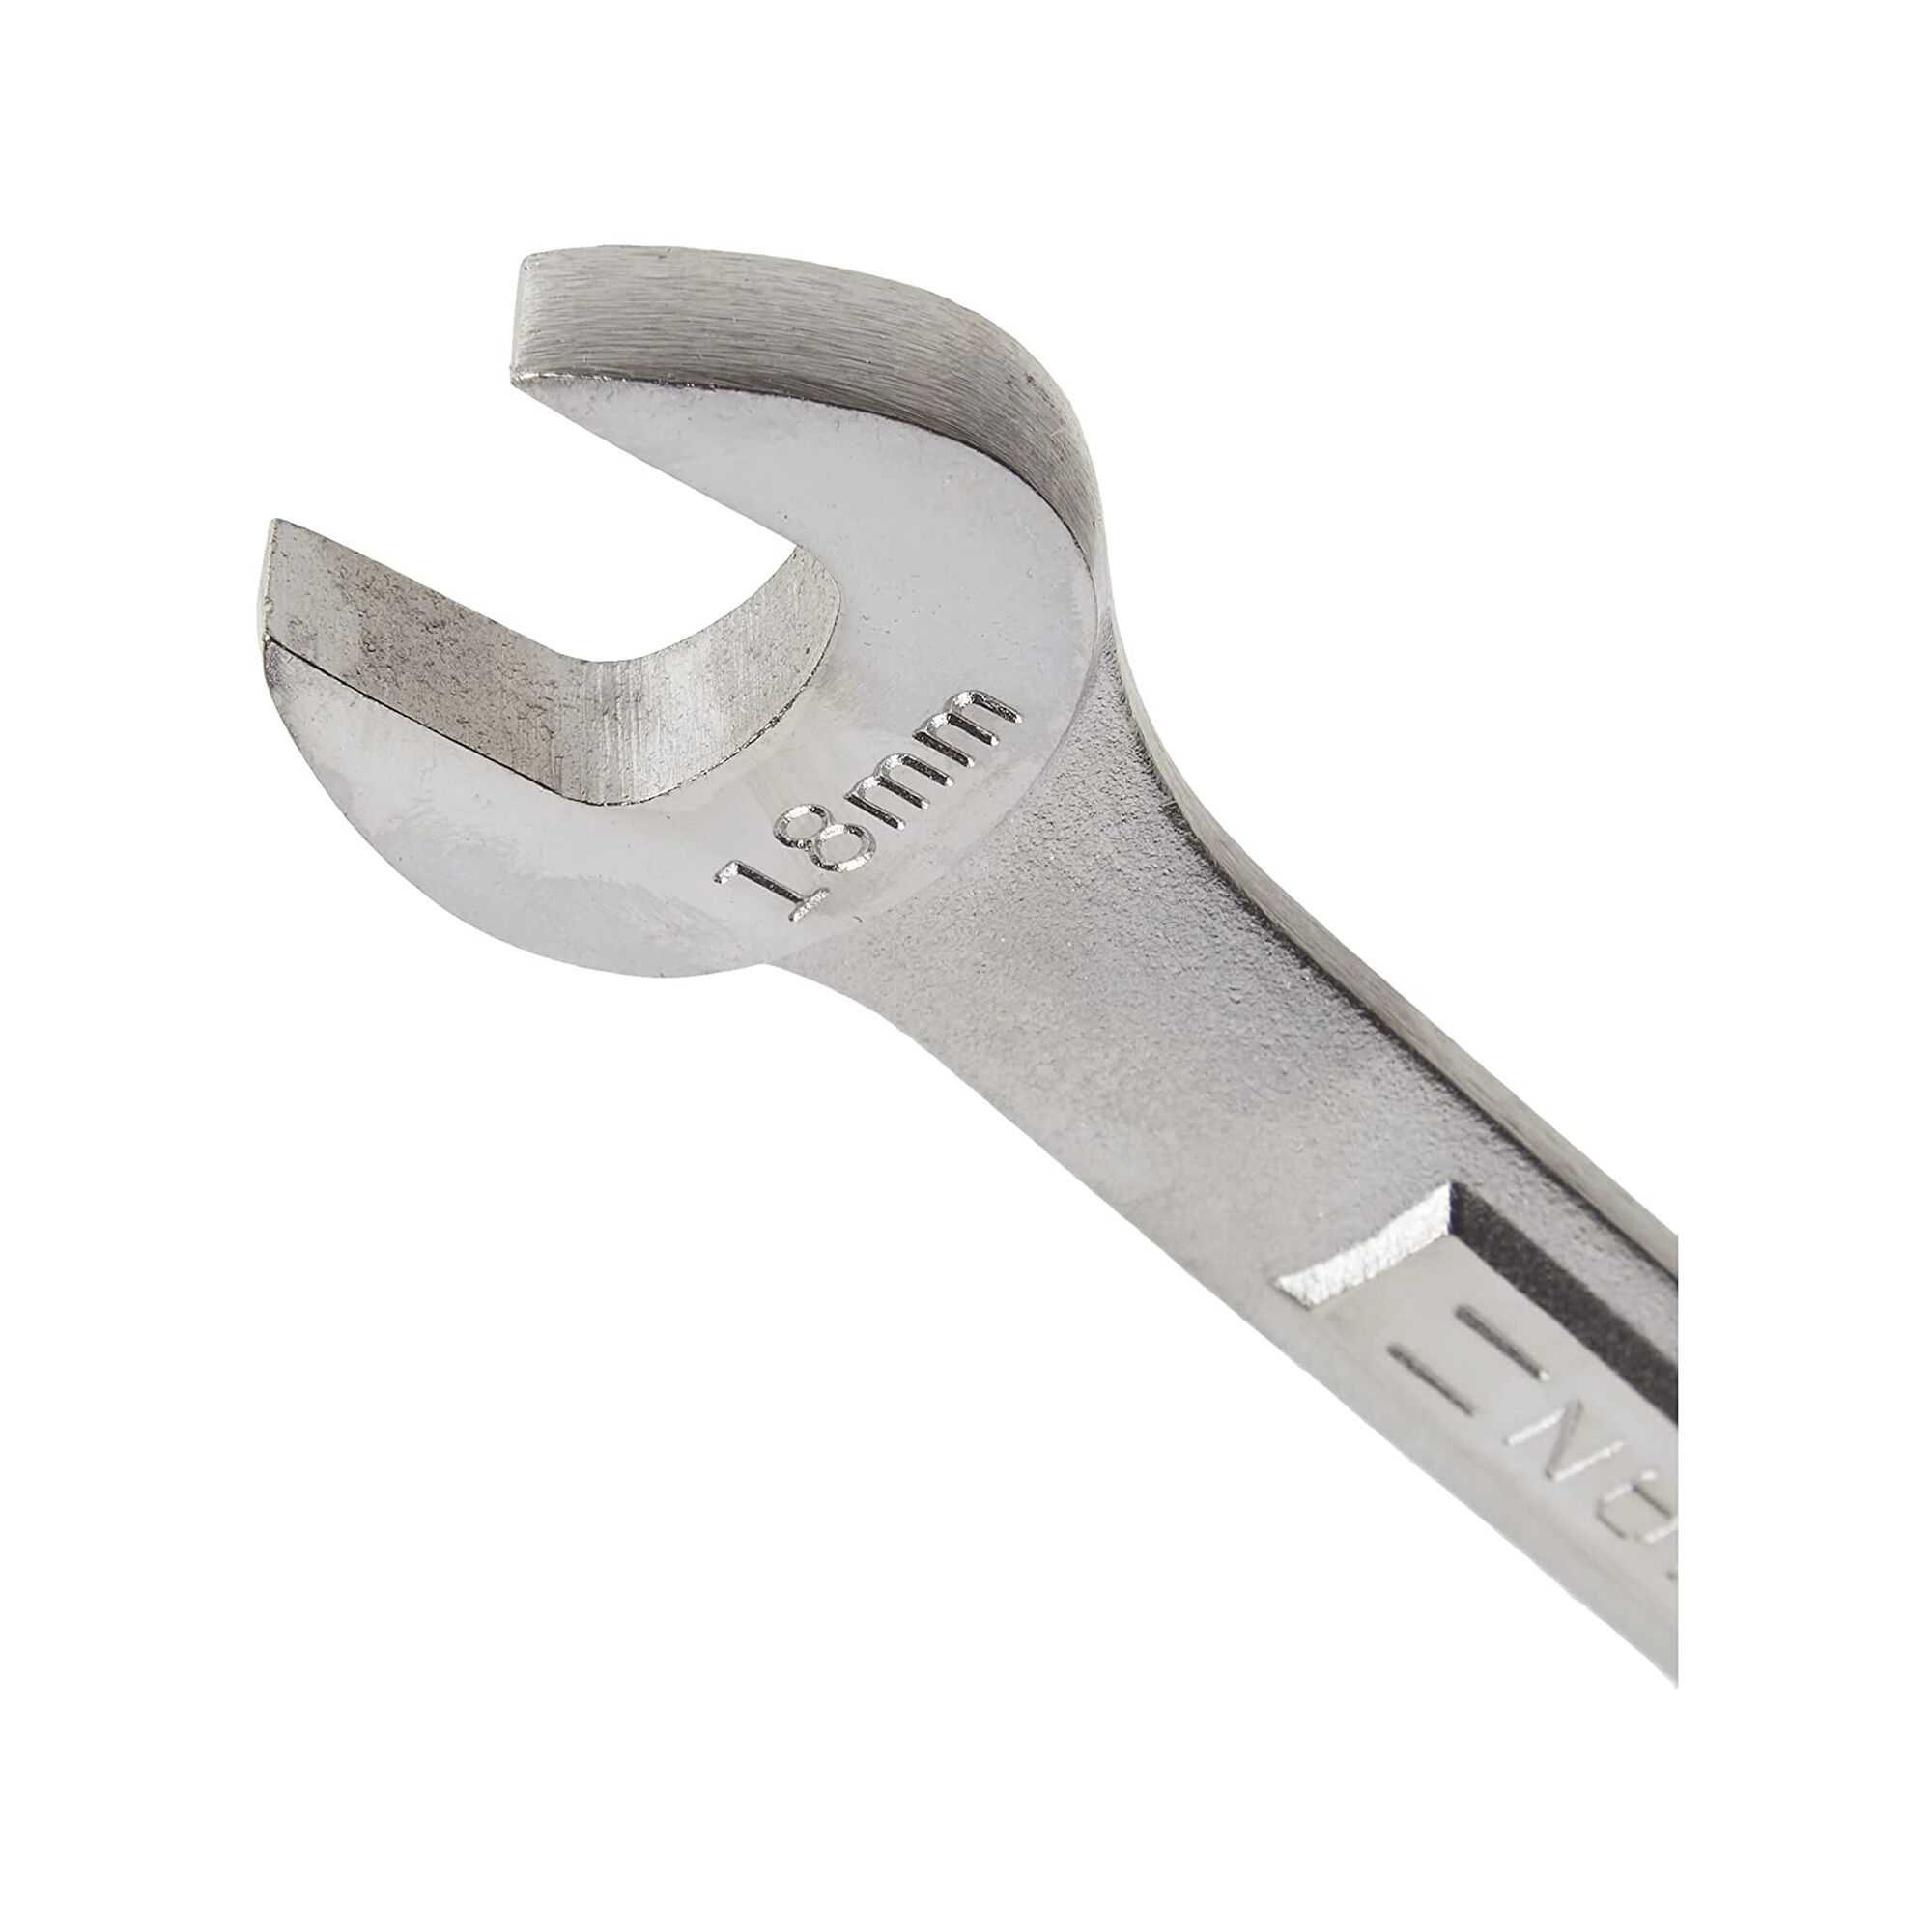 View of CRAFTSMAN Wrenches: Combination highlighting product features